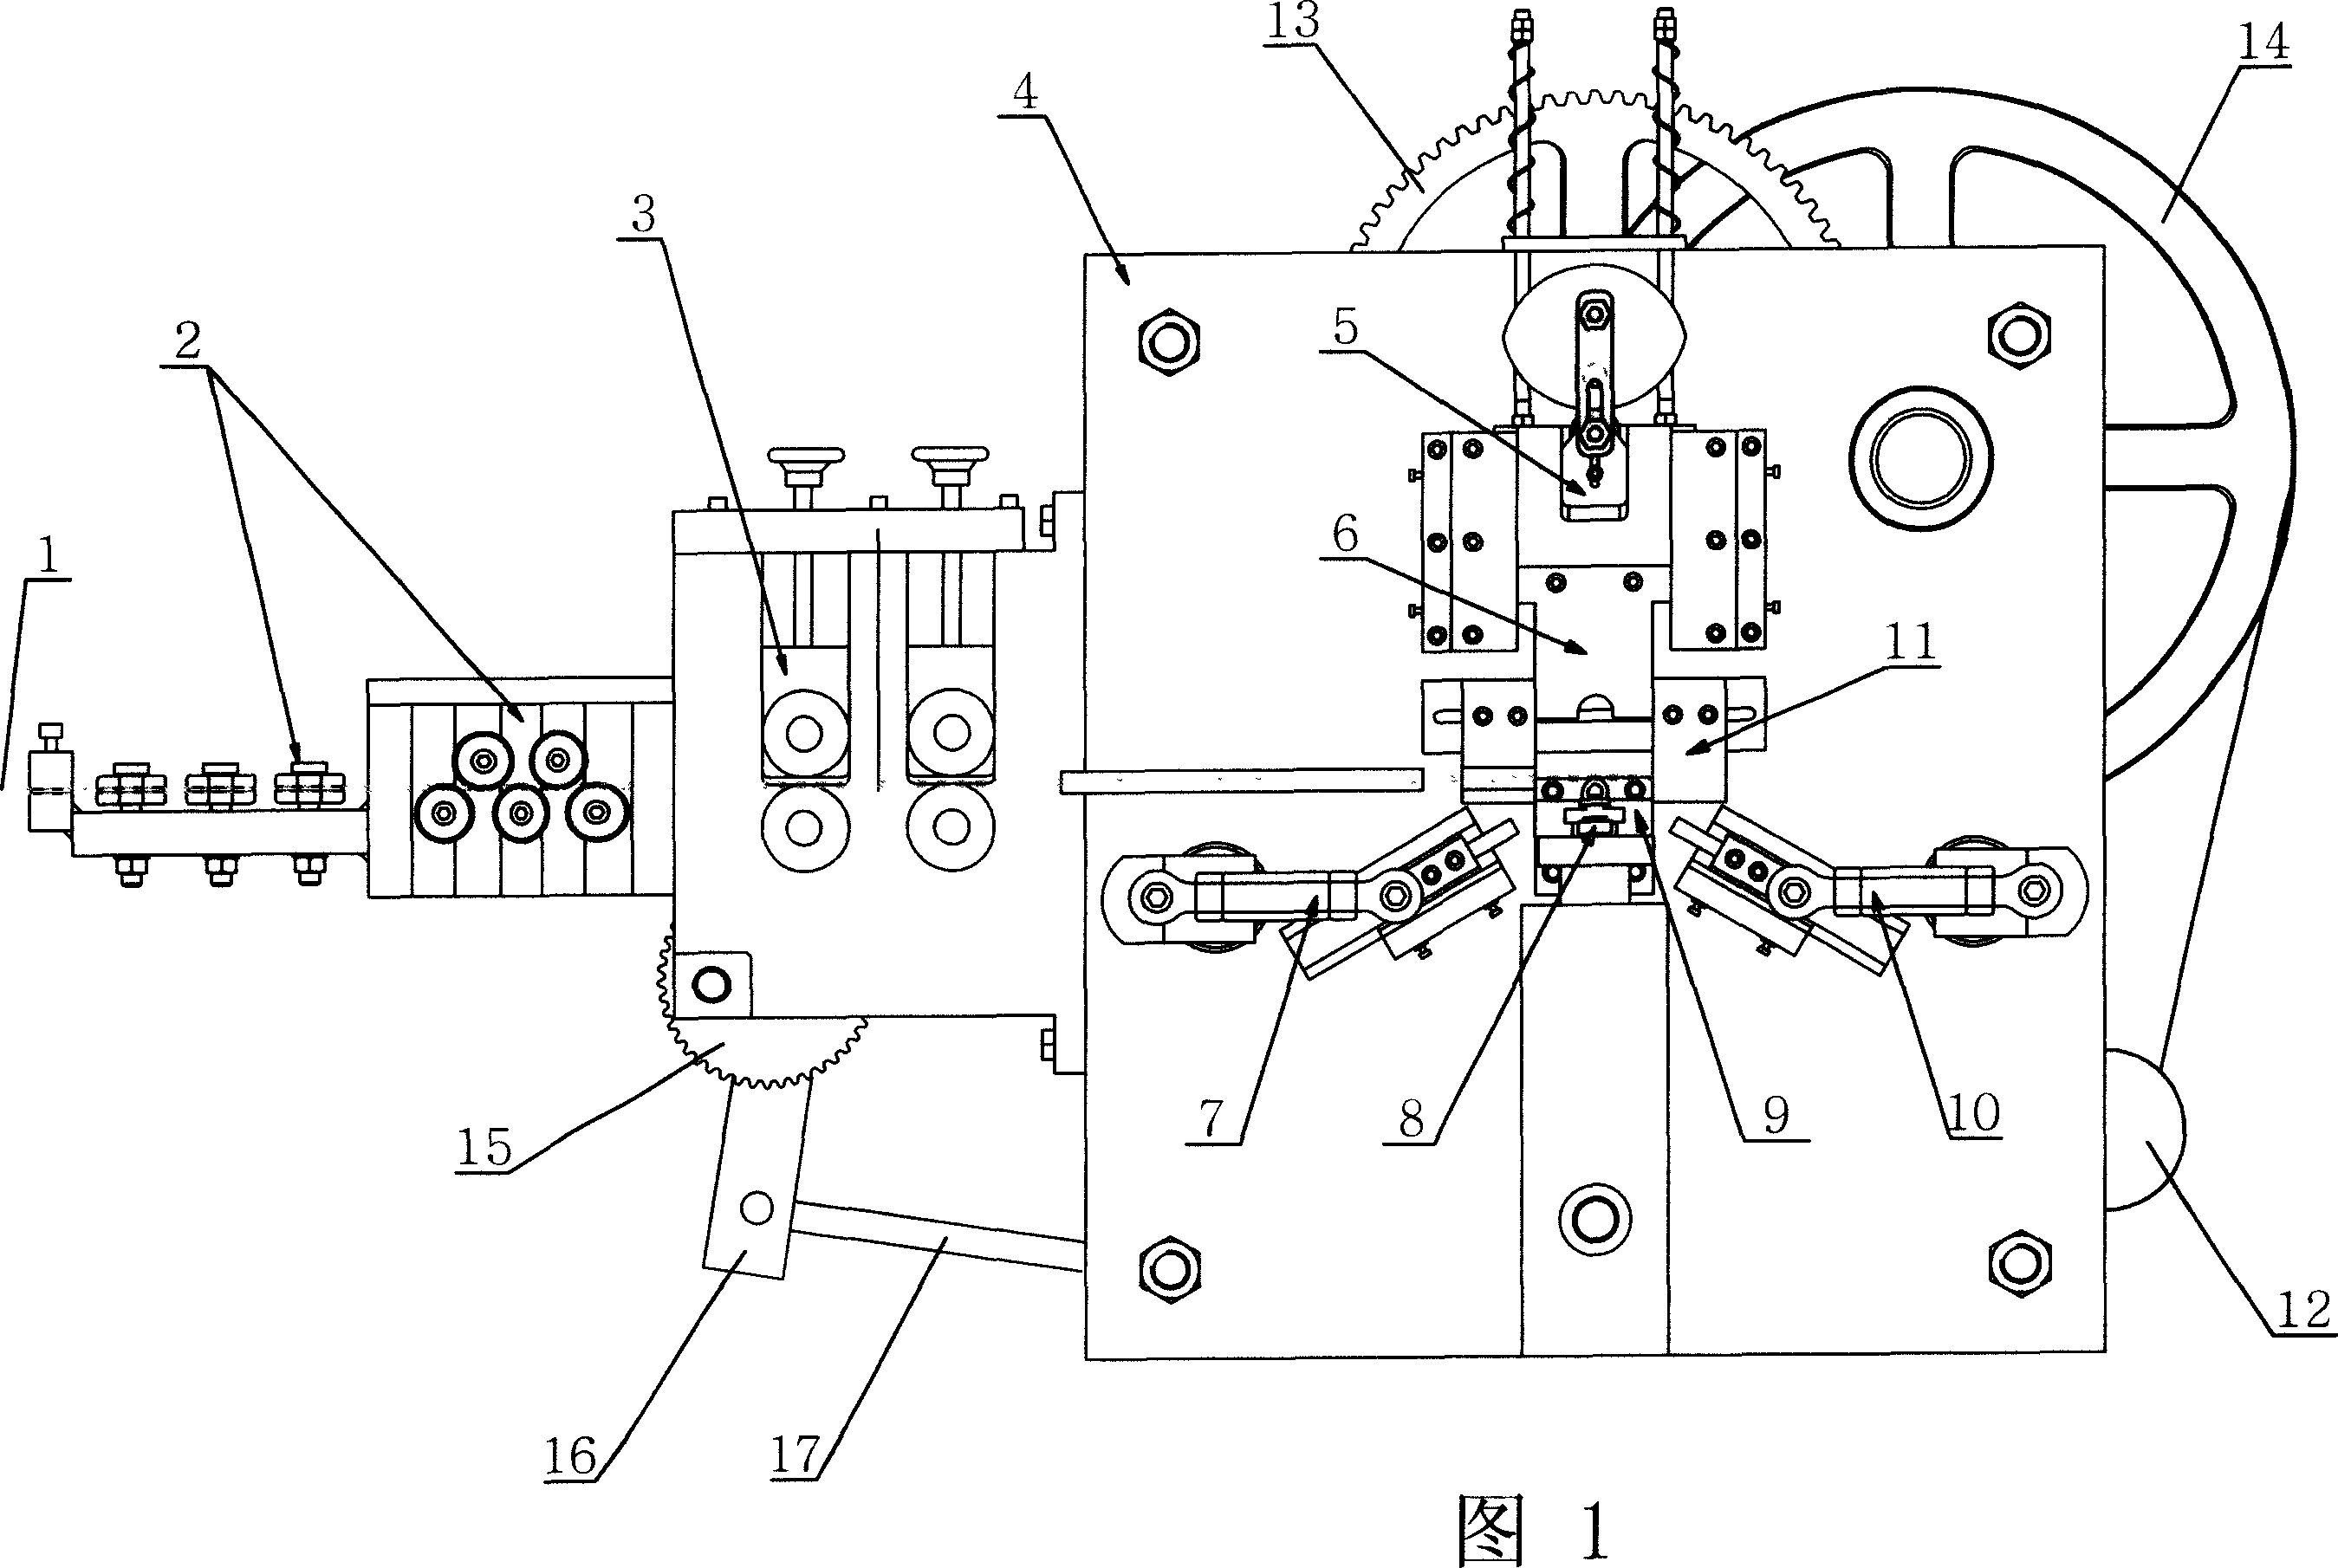 Punch forming machine for double-hook on antiskid chain